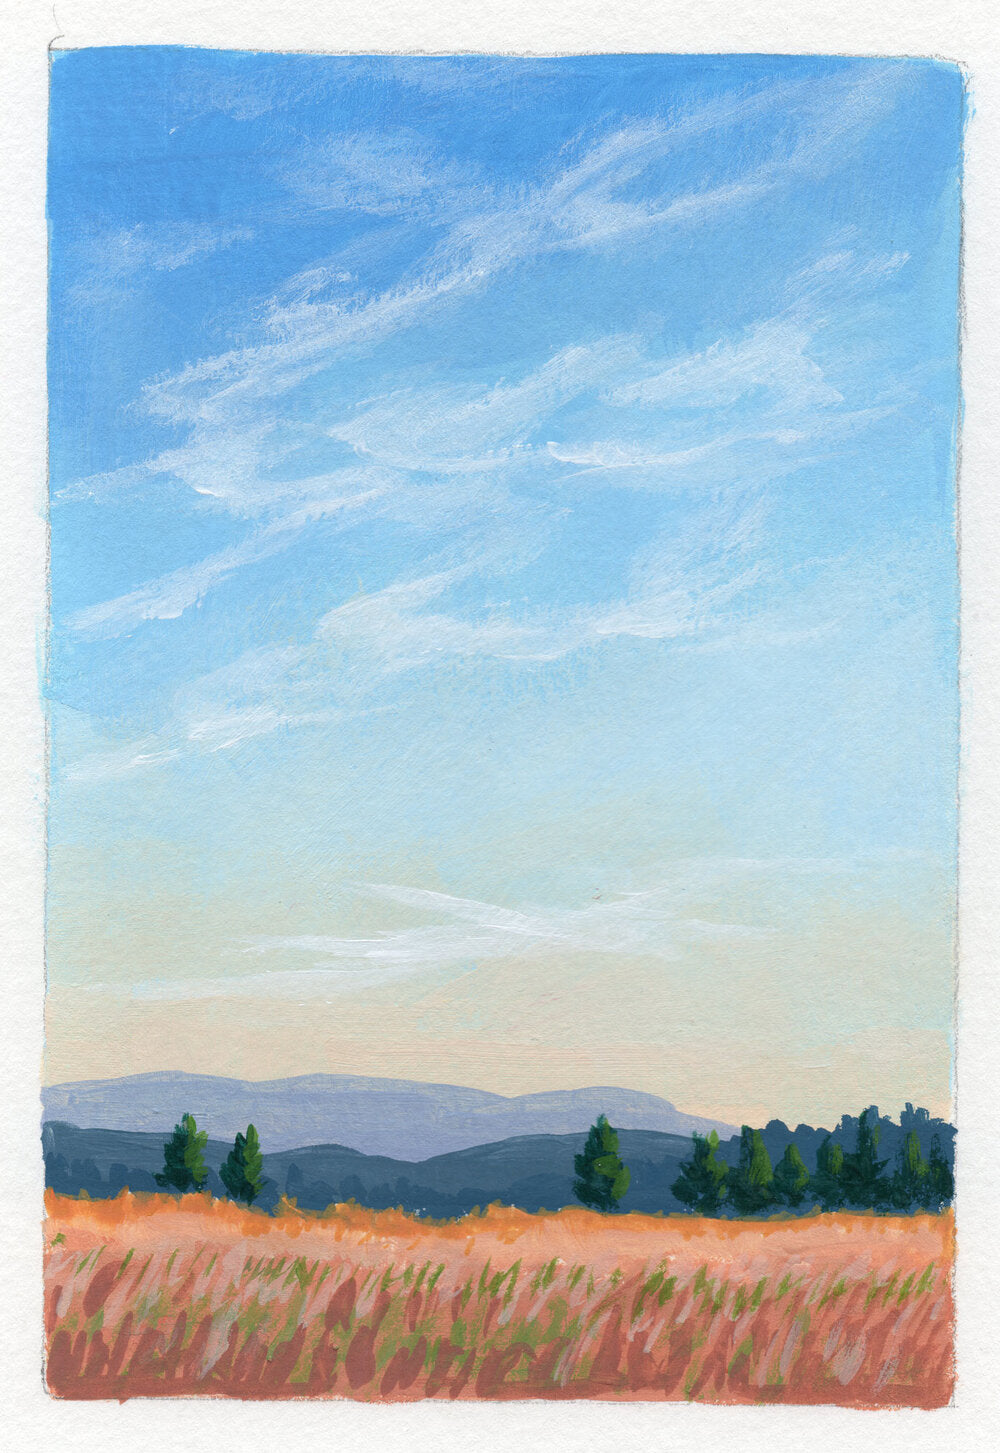 Powell Butte in October - mini painting